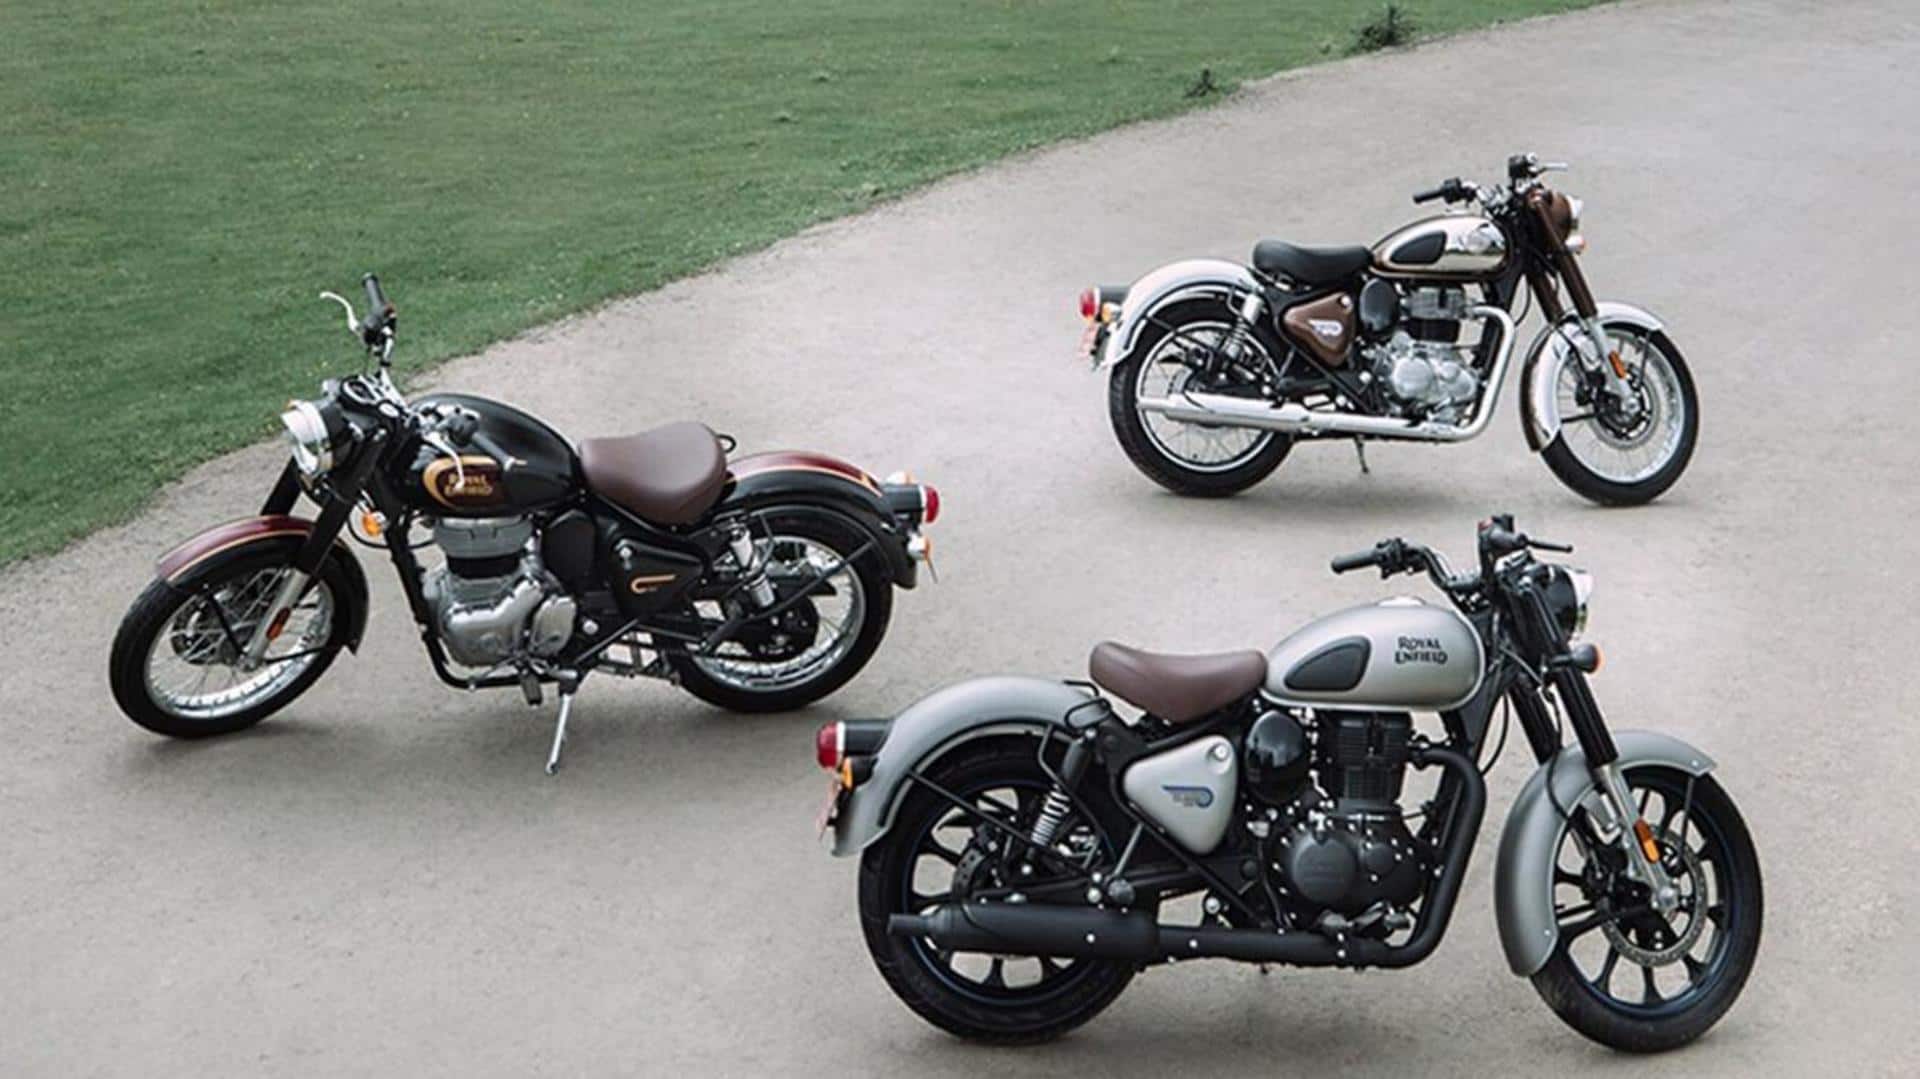 Royal Enfield Classic 350 becomes more expensive: Check updated prices